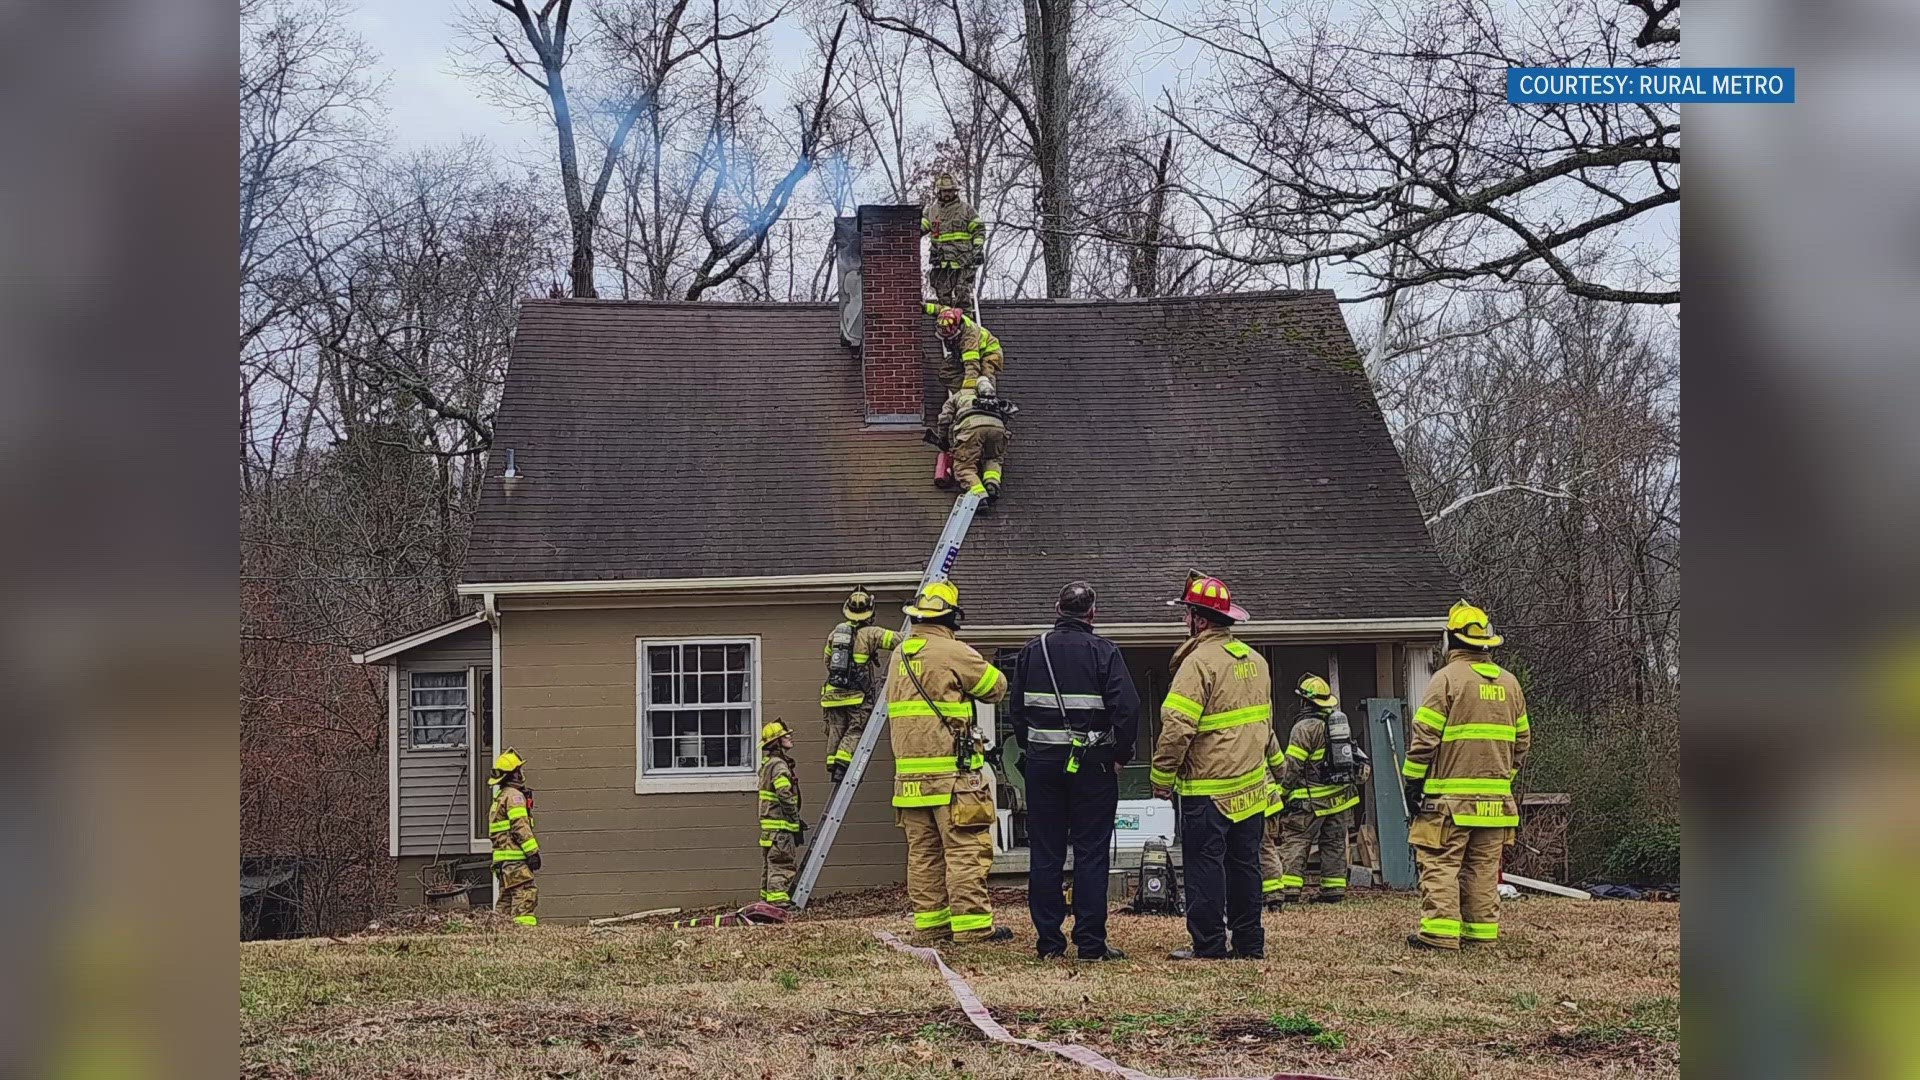 The fire broke out at a home on Strawberry Plains Pike. When crews arrived, flames were coming out of the chimney from a wood stove.